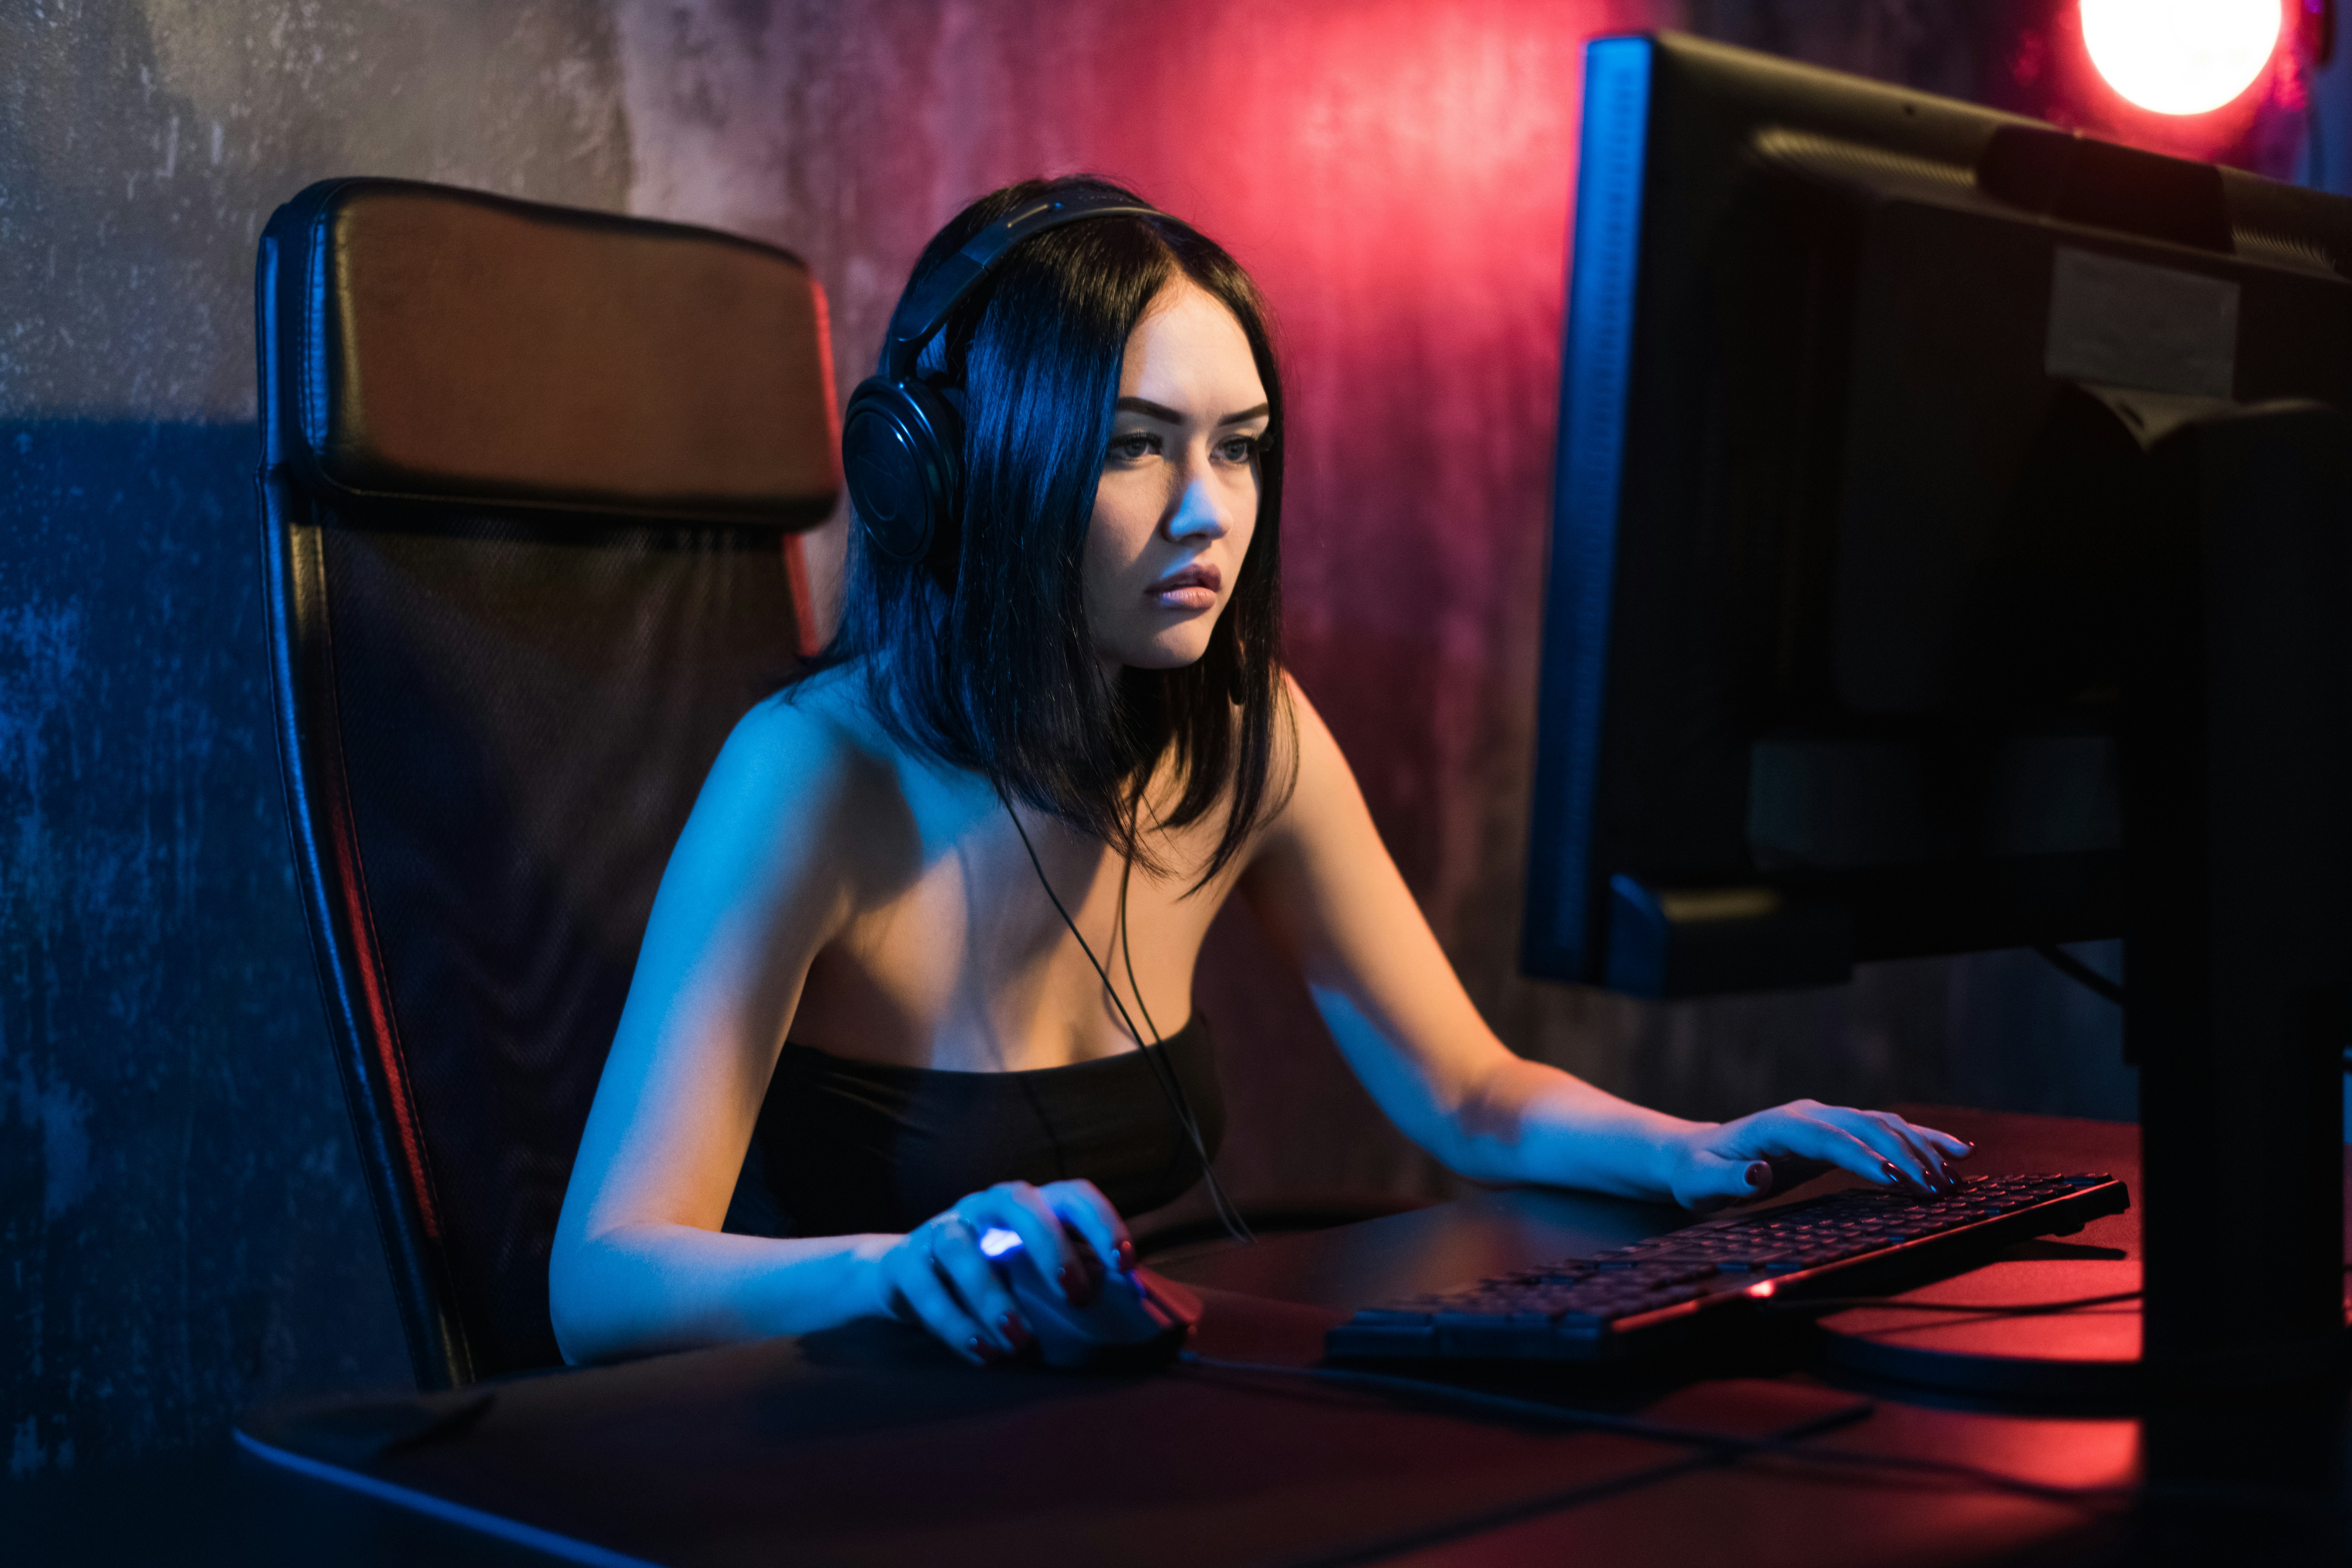 Kitty Plays Games Playboy